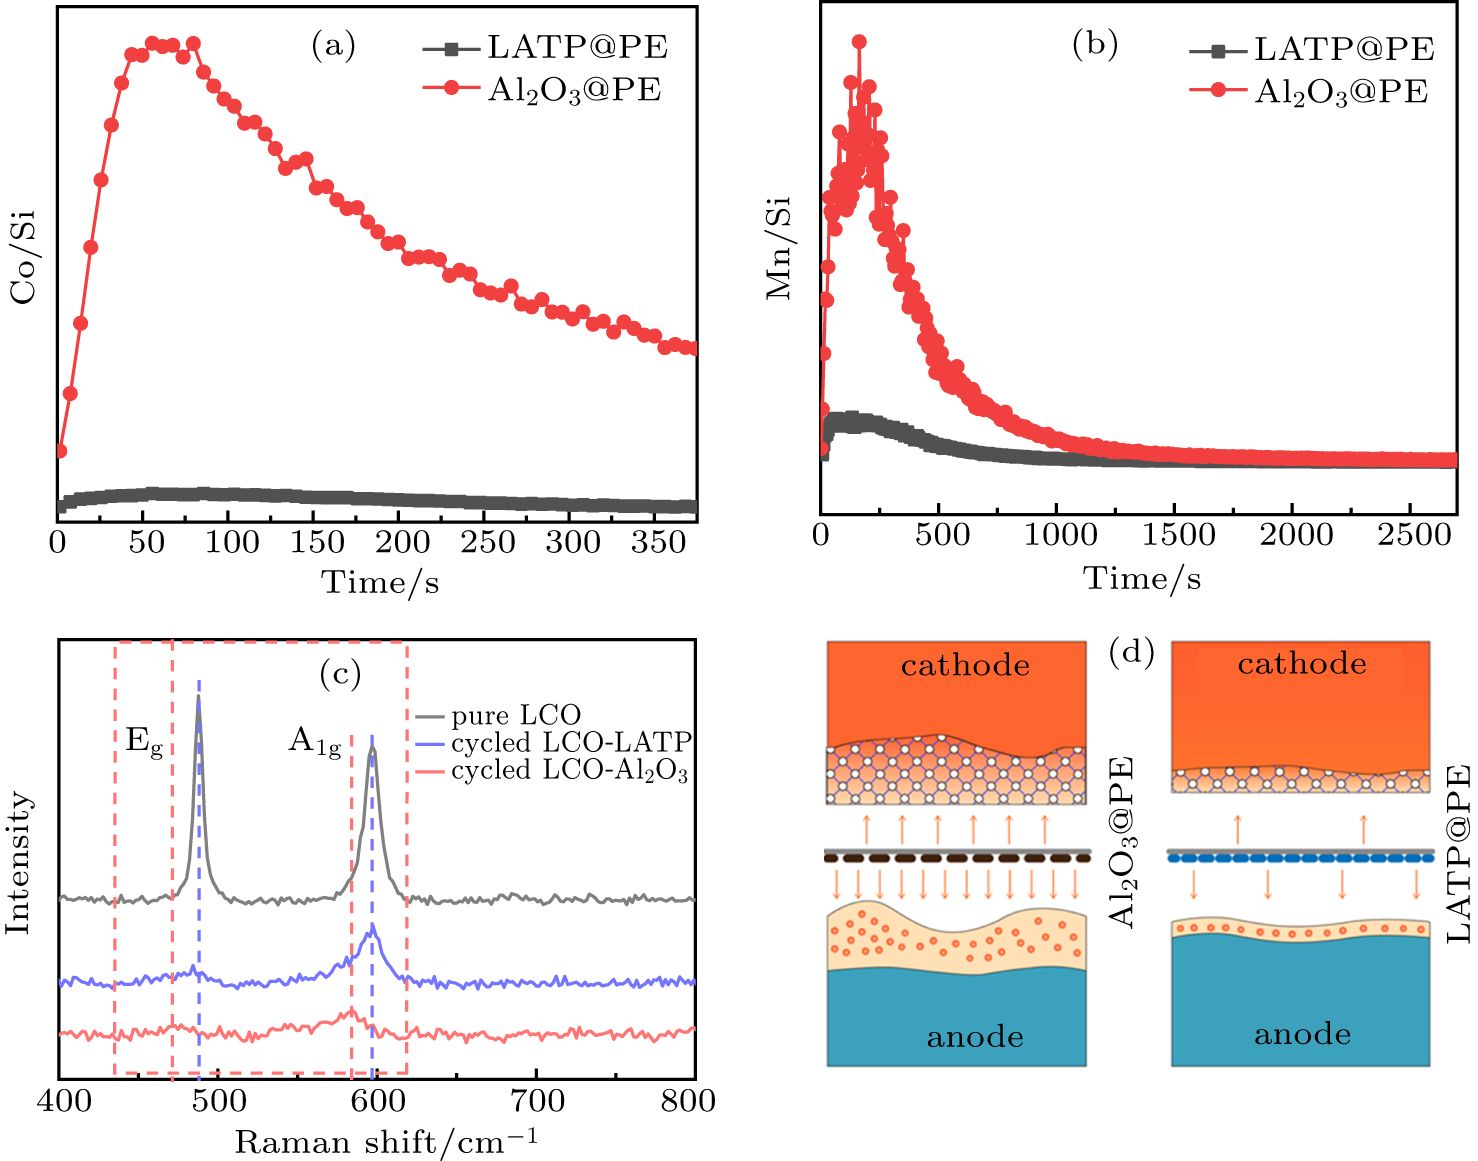 Suppressing Transition Metal Dissolution And Deposition In Lithium Ion Batteries Using Oxide Solid Electrolyte Coated Polymer Separator